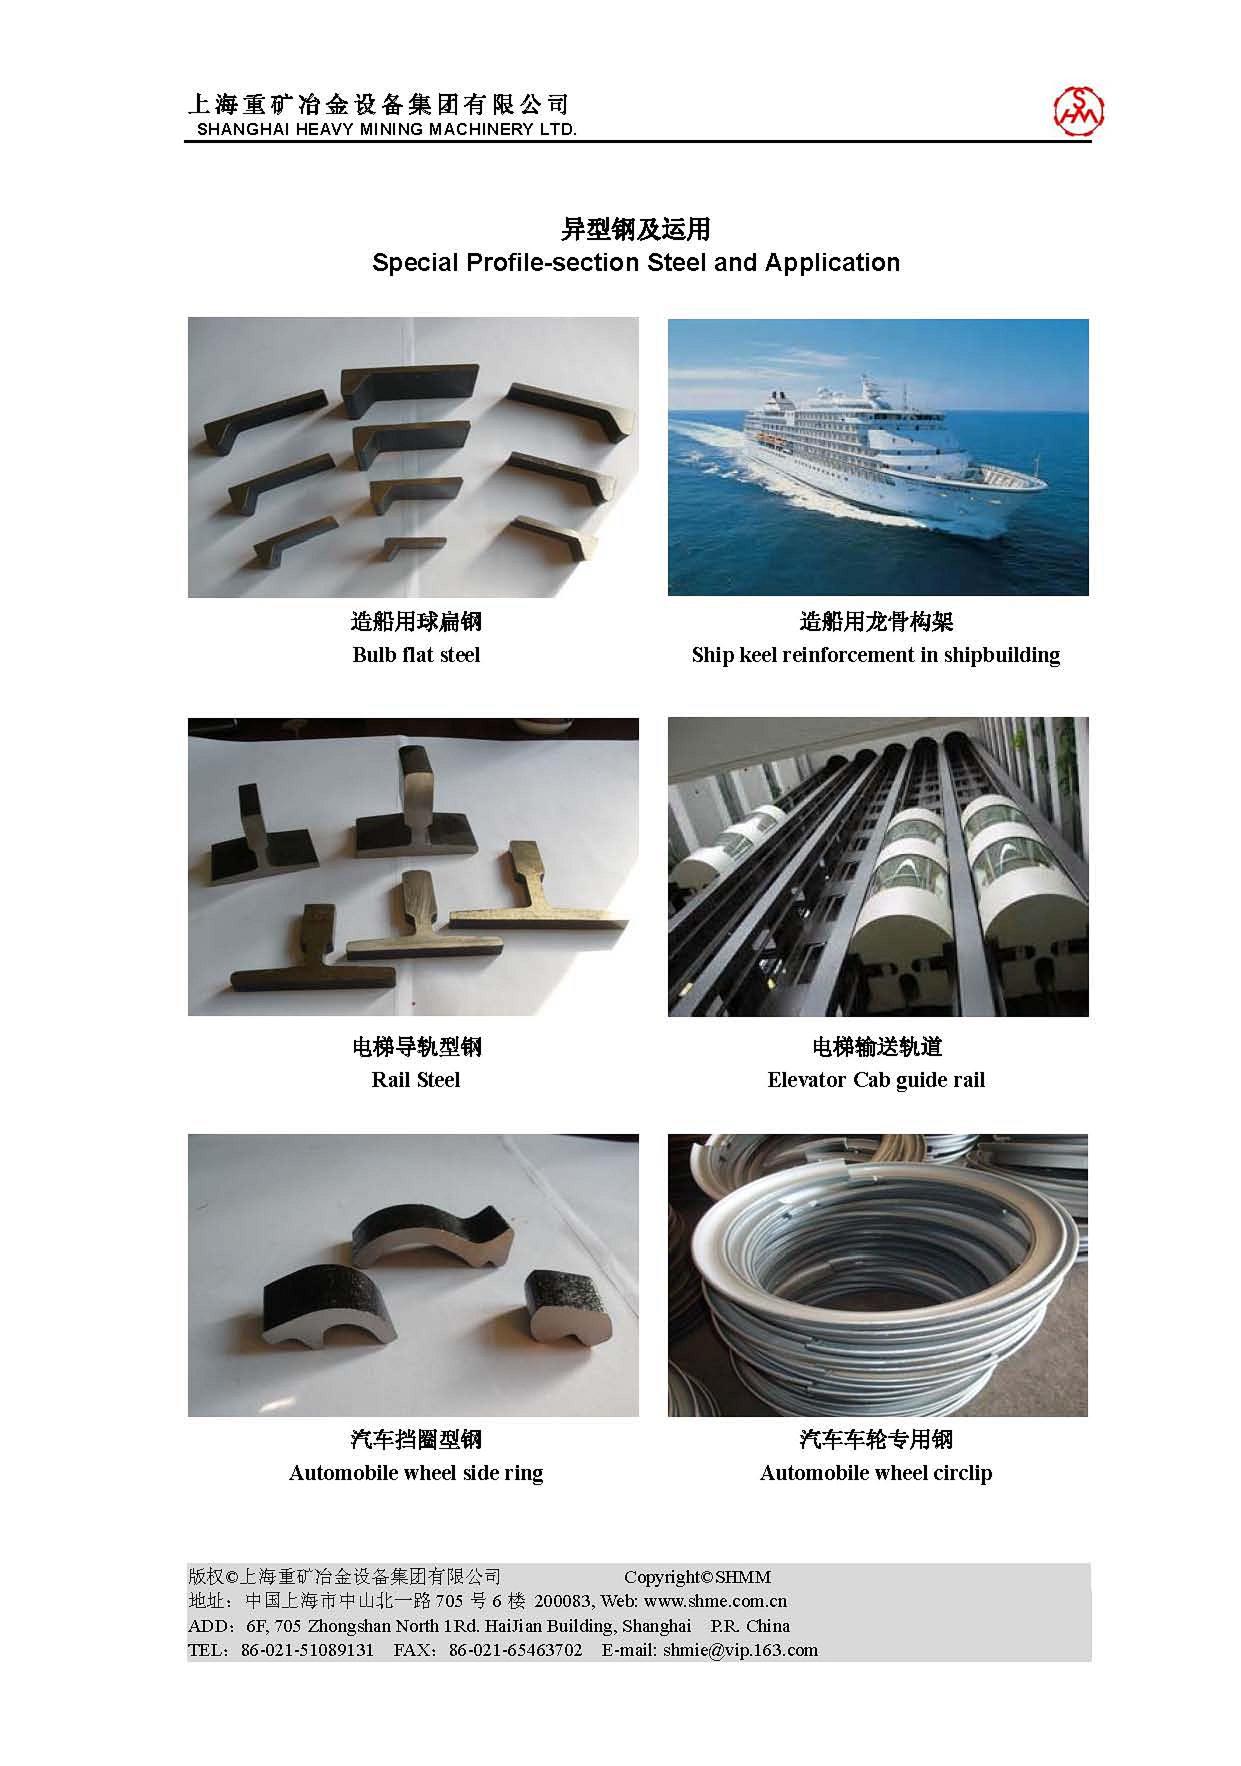 Special Profile-Section Steel and Application